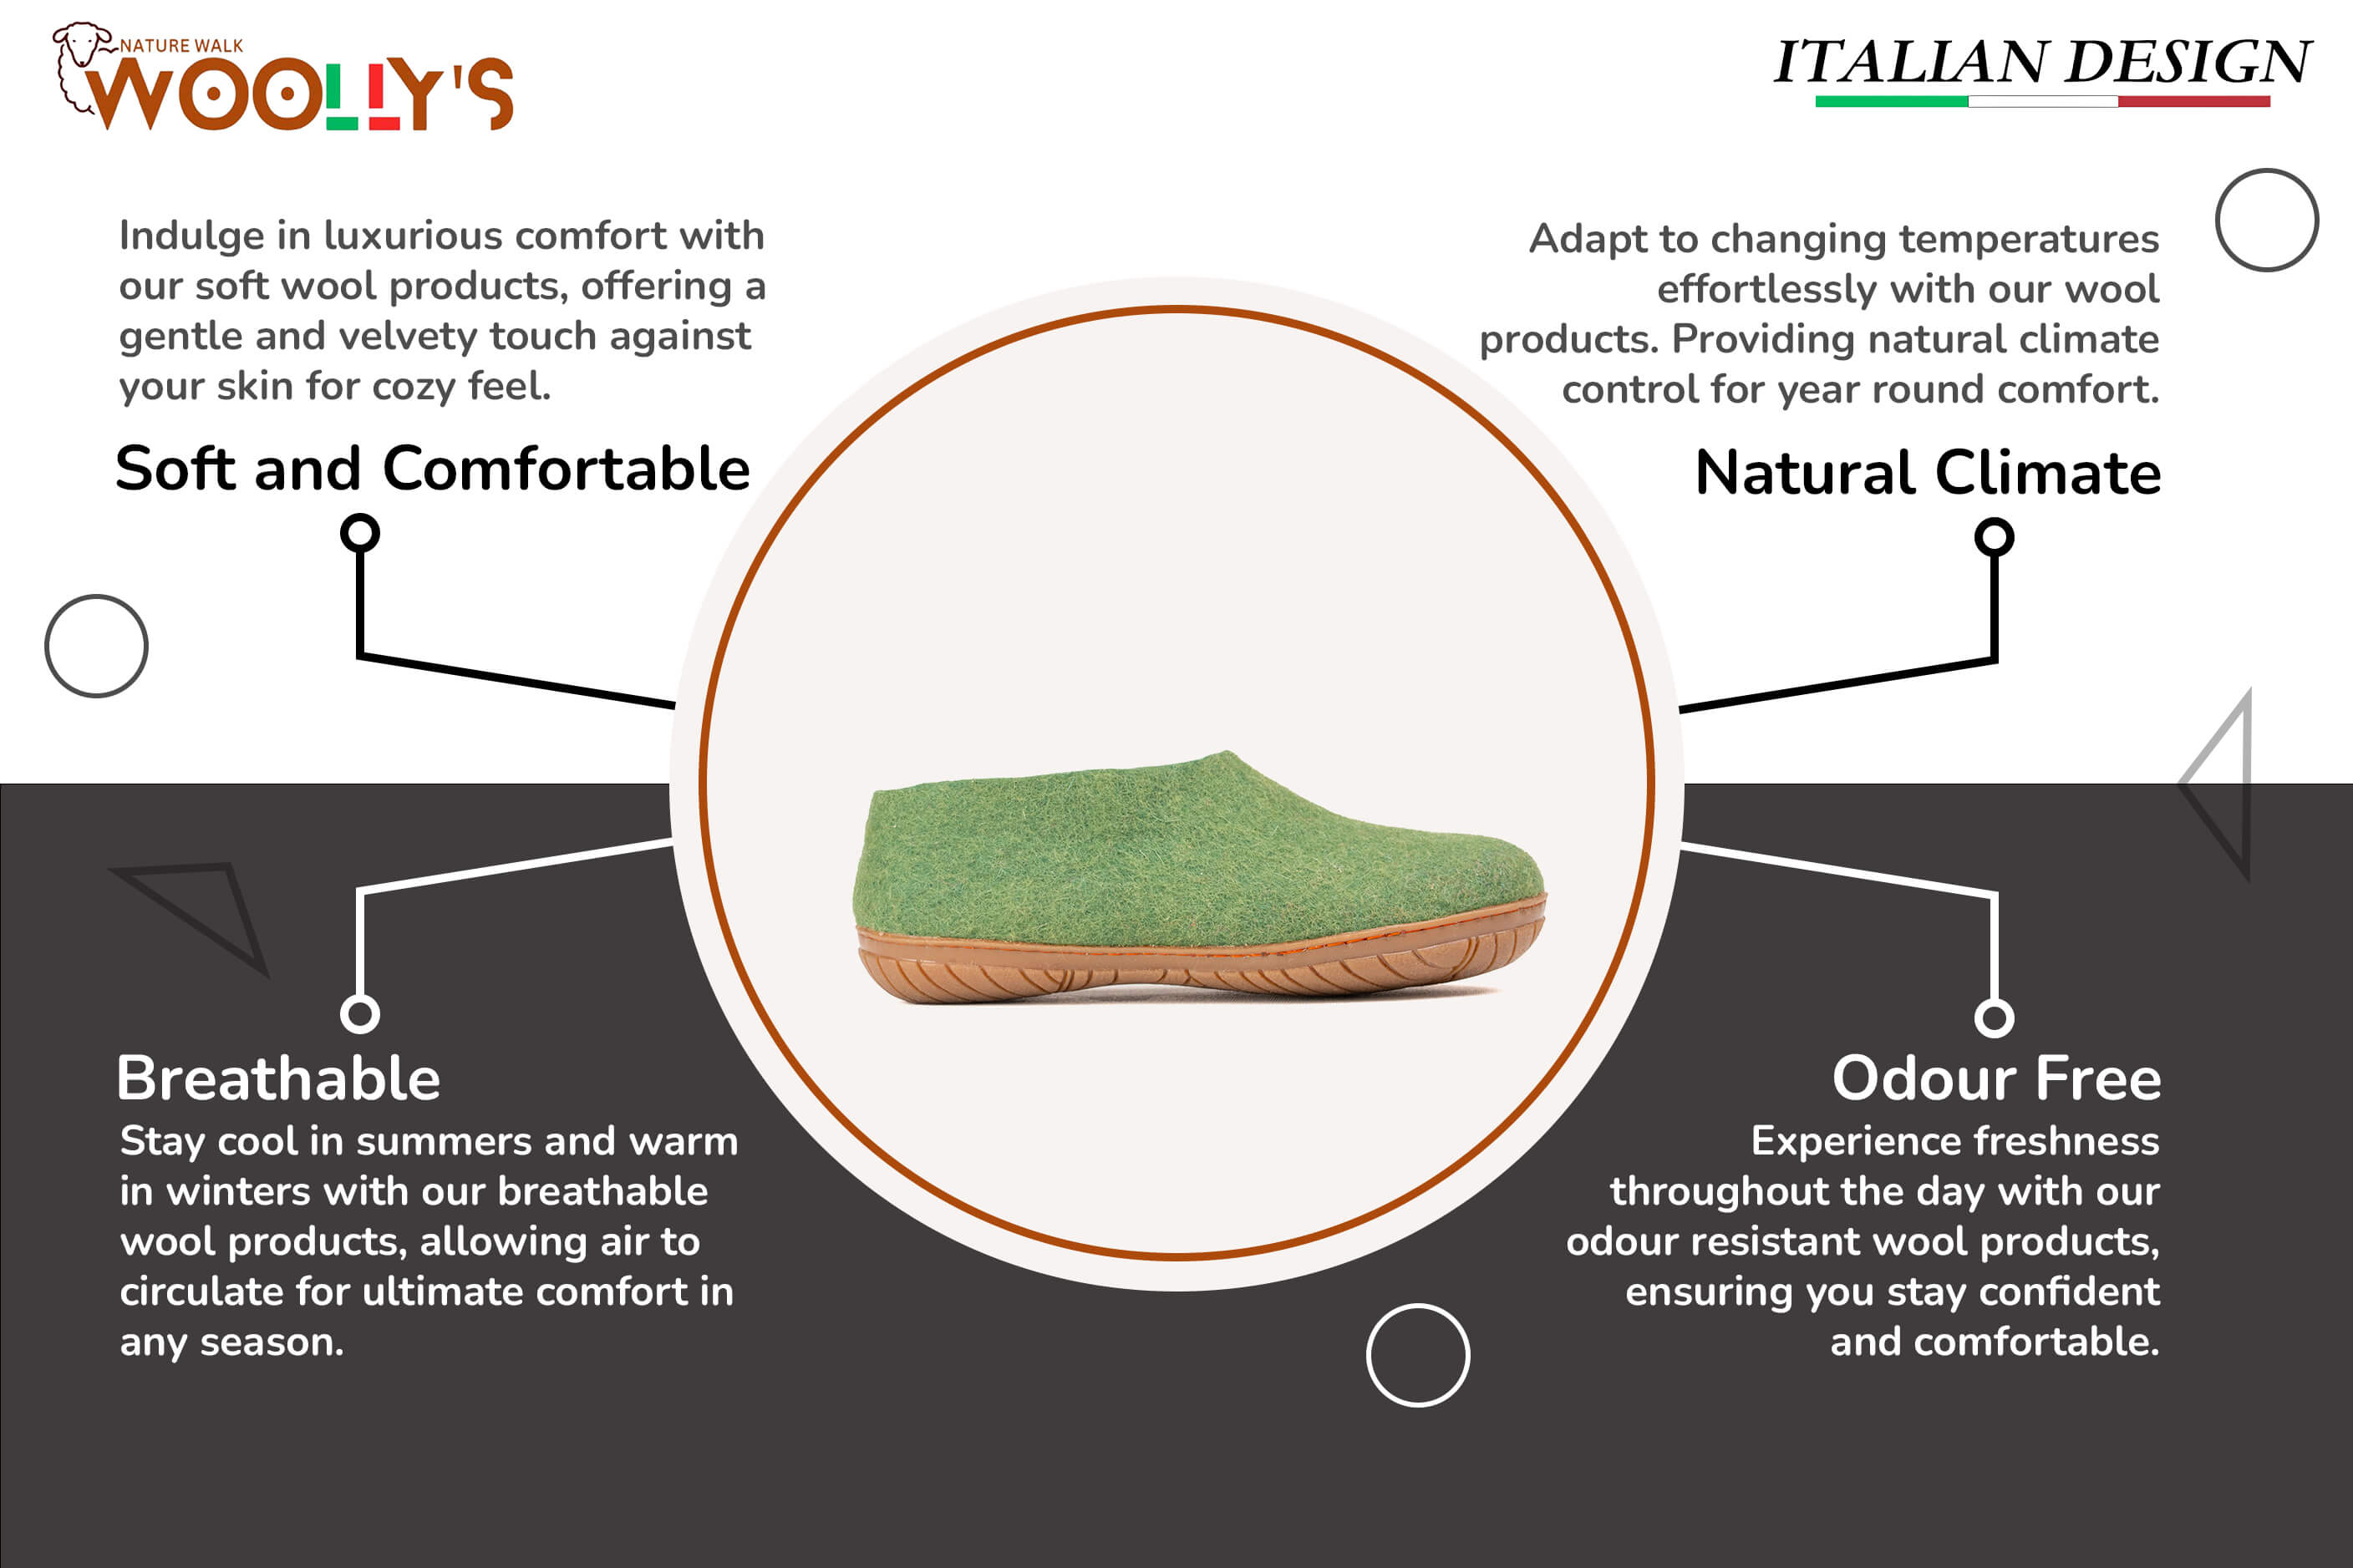 Outdoor Shoes With Rubber Sole - Green - Woollyes